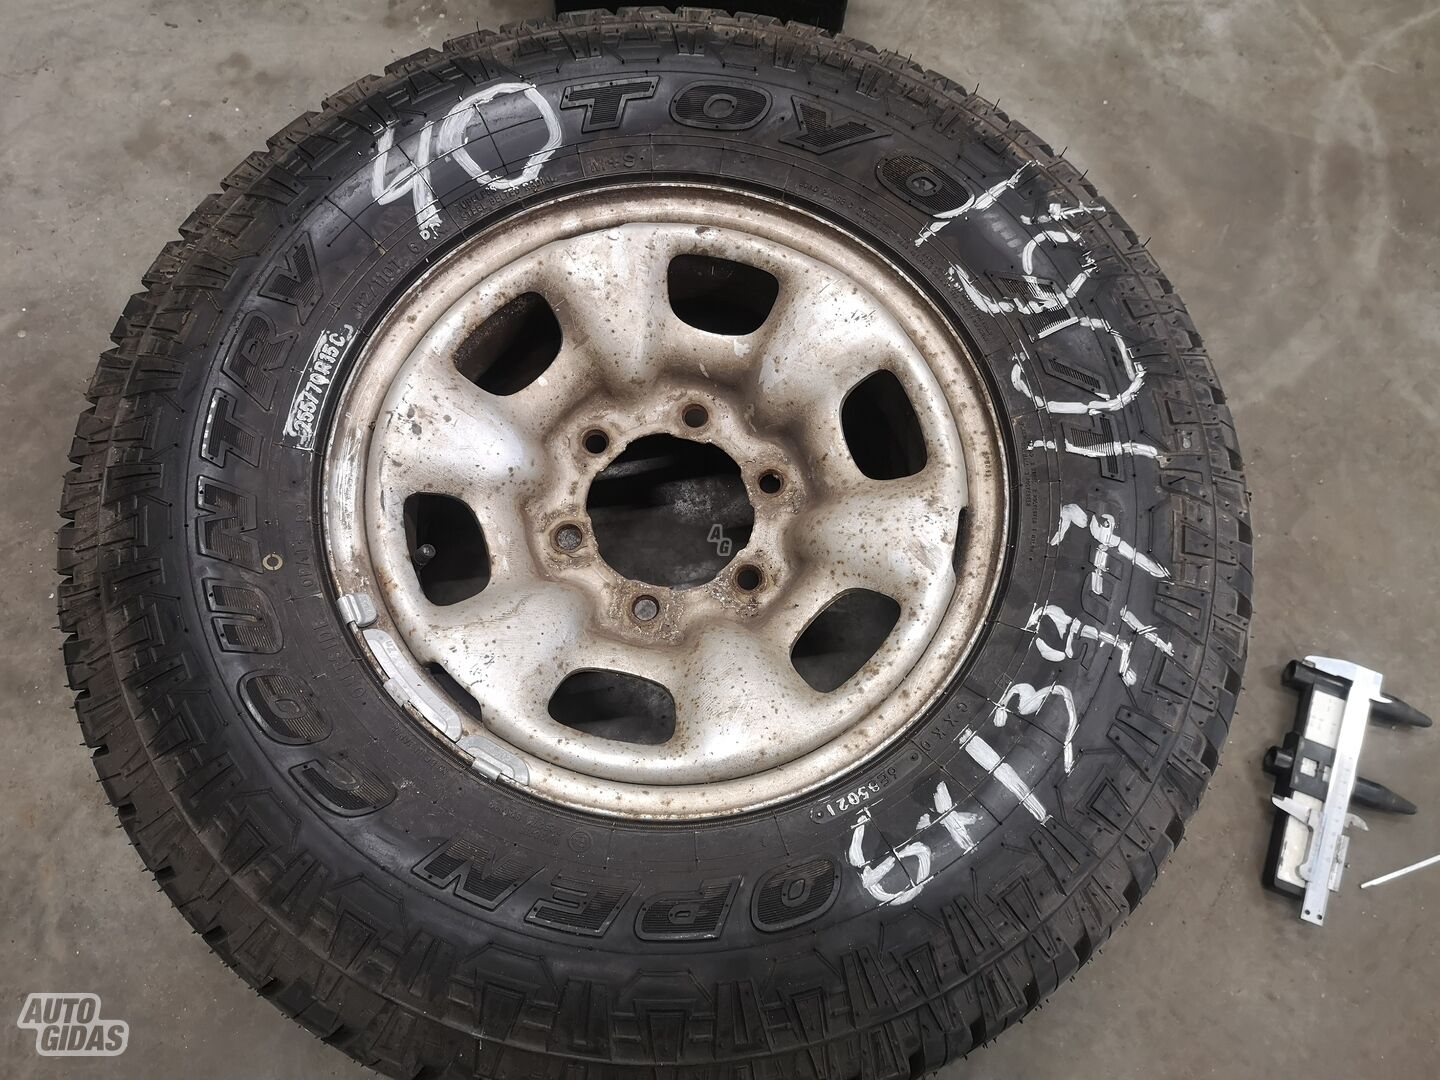 Toyota R15 steel stamped rims